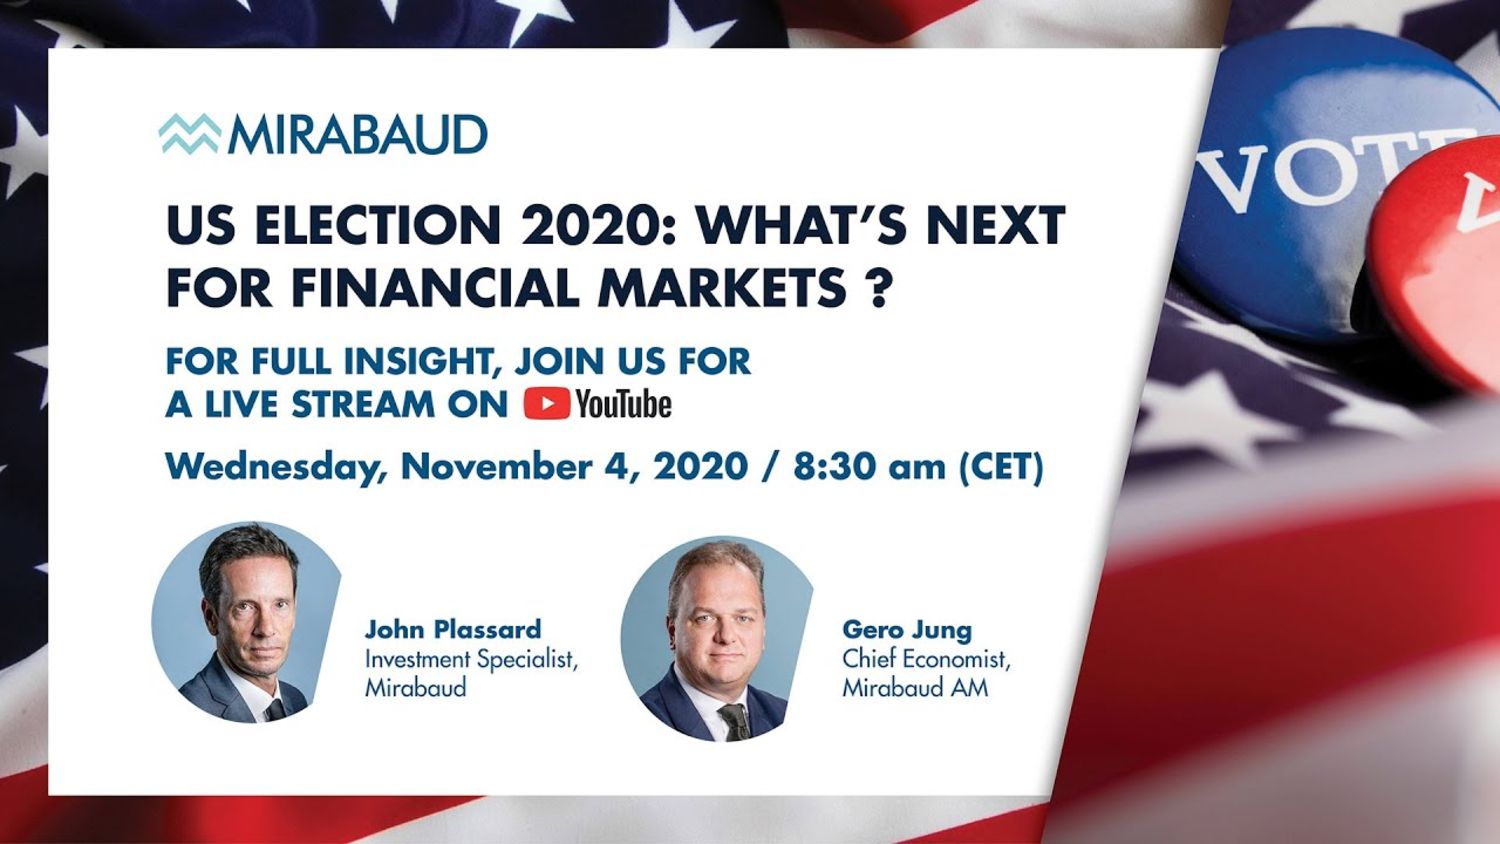 US election 2020: what’s next for financial markets?